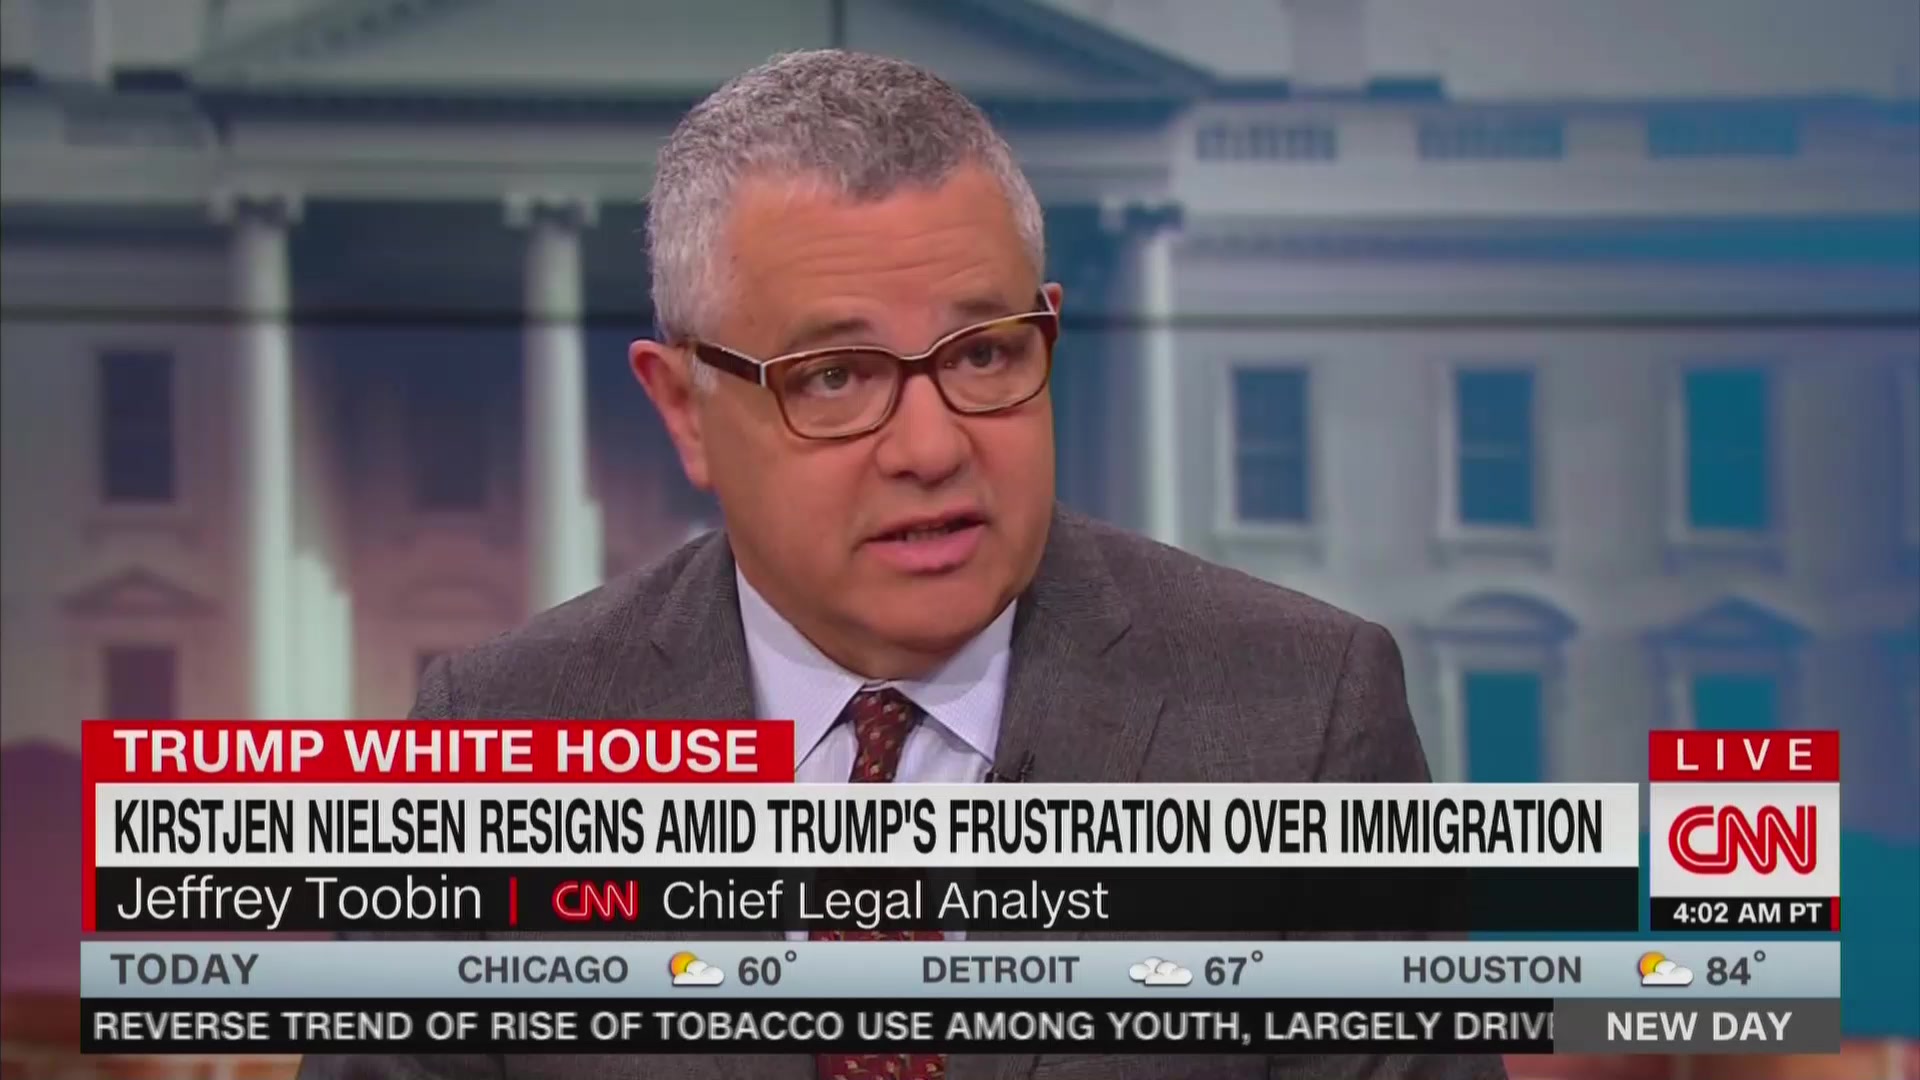 CNN’s Jeffrey Toobin: Kirstjen Nielsen Will Be Remembered as the ‘Woman Who Put Children in Cages’